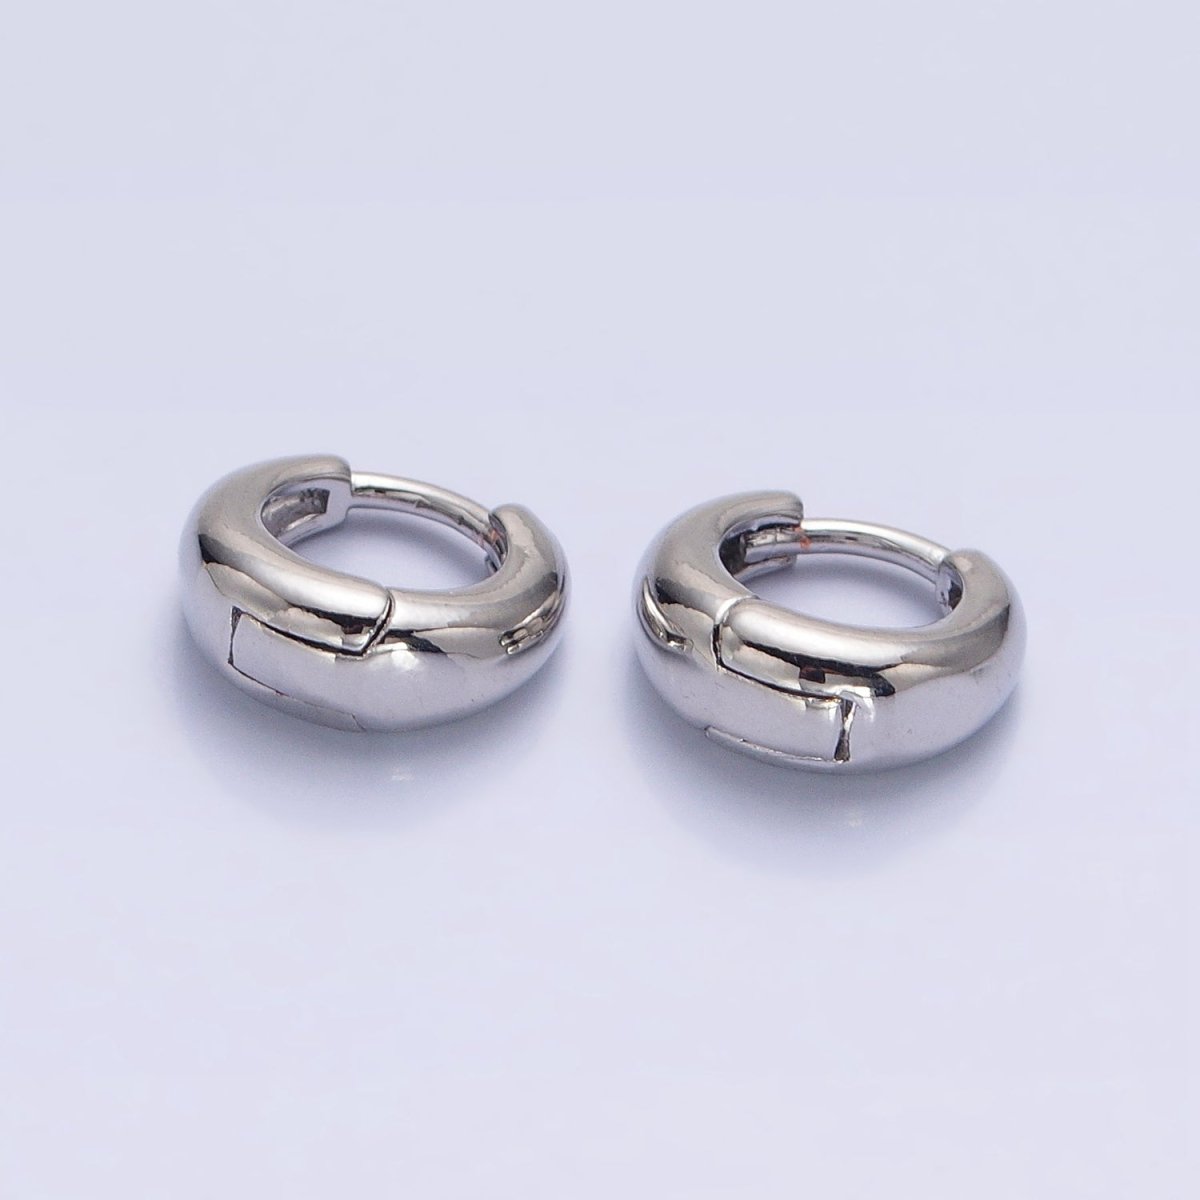 Silver, Gold Minimalist 10mm Round Cartilage Earrings | AB806 AB828 - DLUXCA